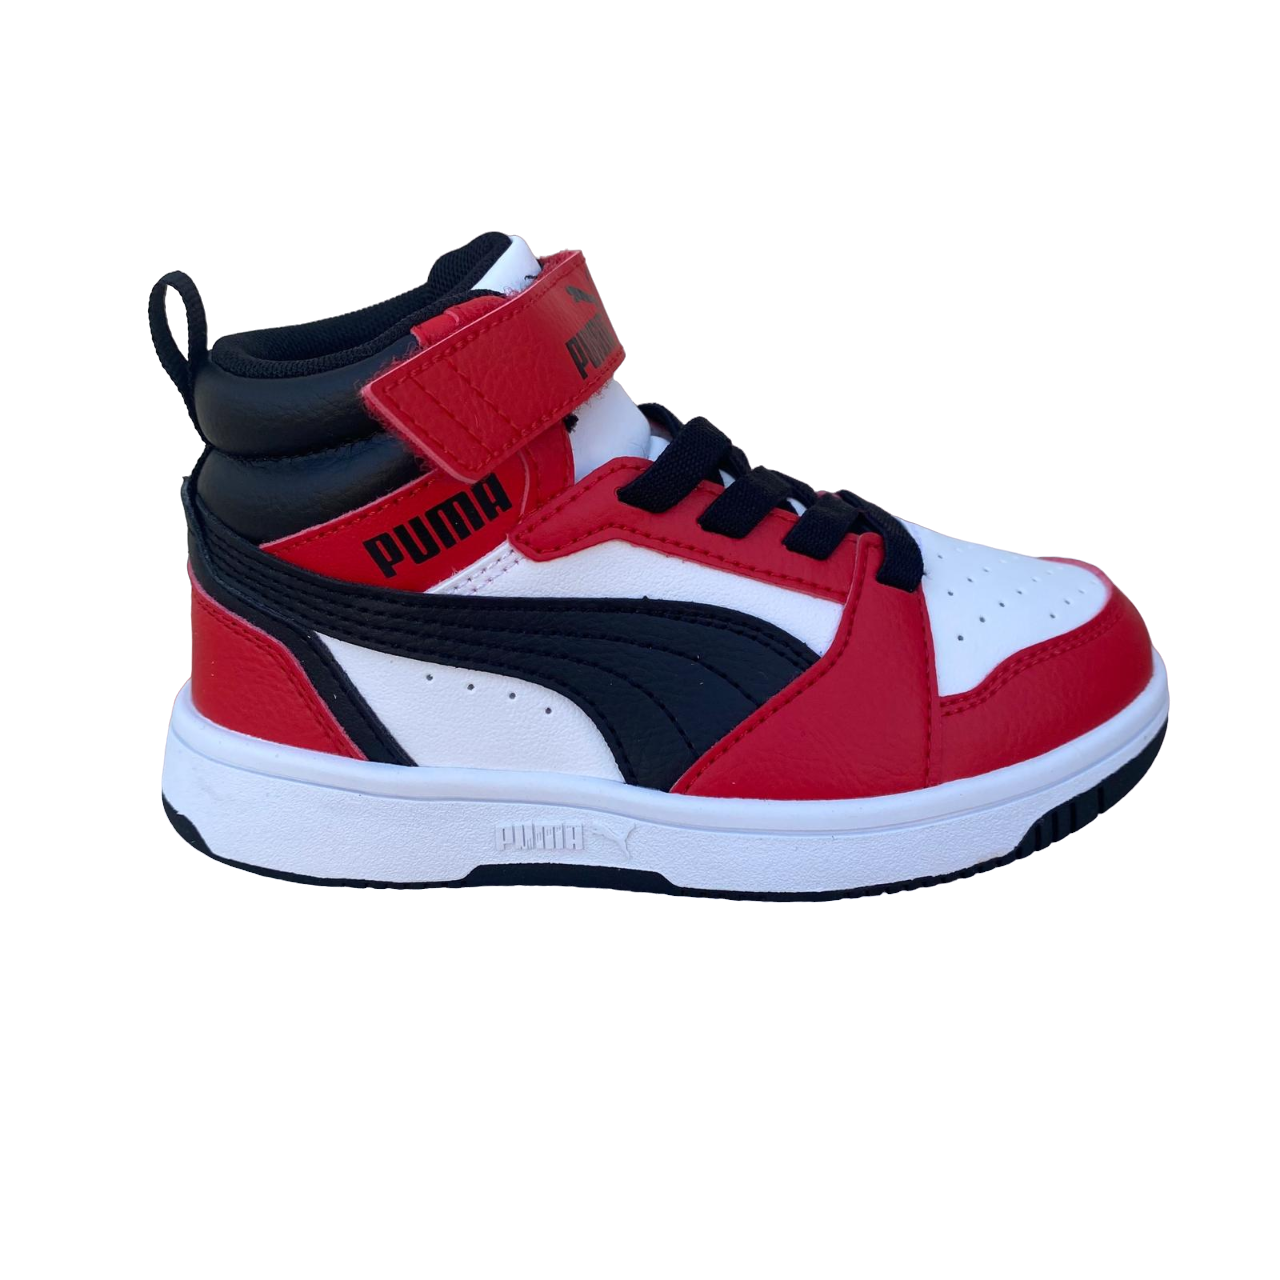 Puma boys&#39; high shoe with lace and strap Rebound V6 AC+PS 393832-03 white-black-red